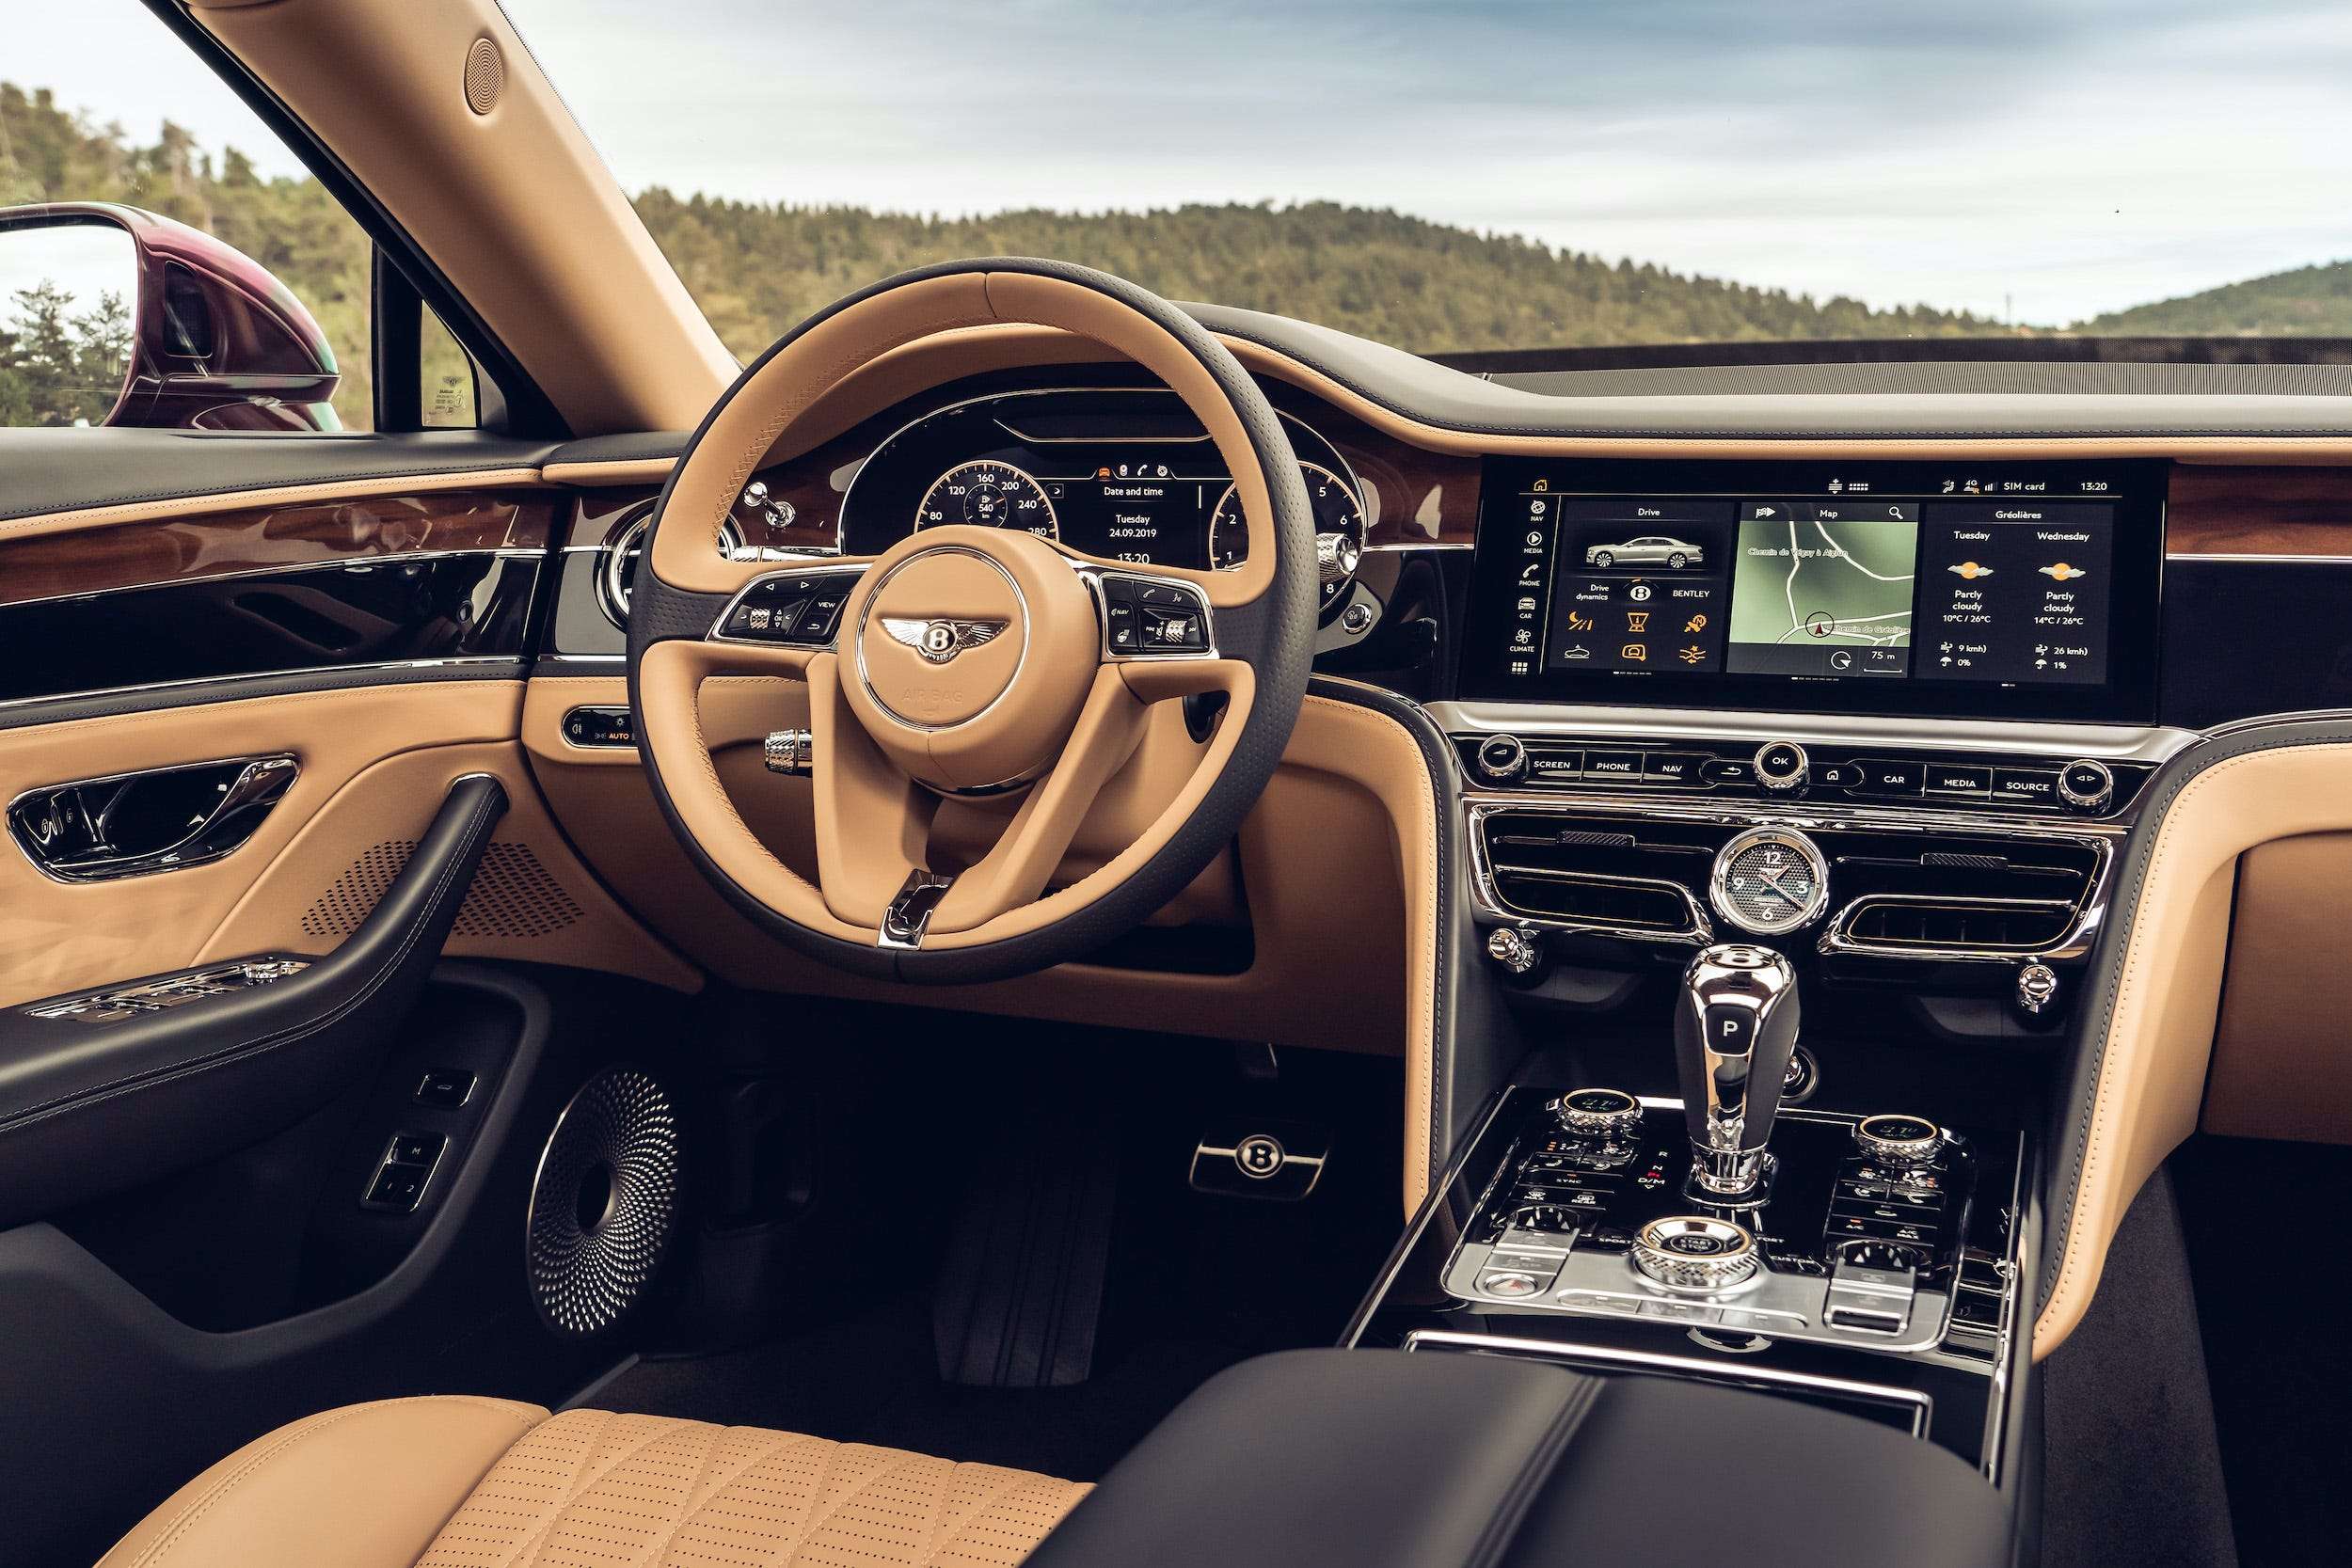 These Are The Top 10 New Car Interiors Of 2020 According To An Automotive Research Company 